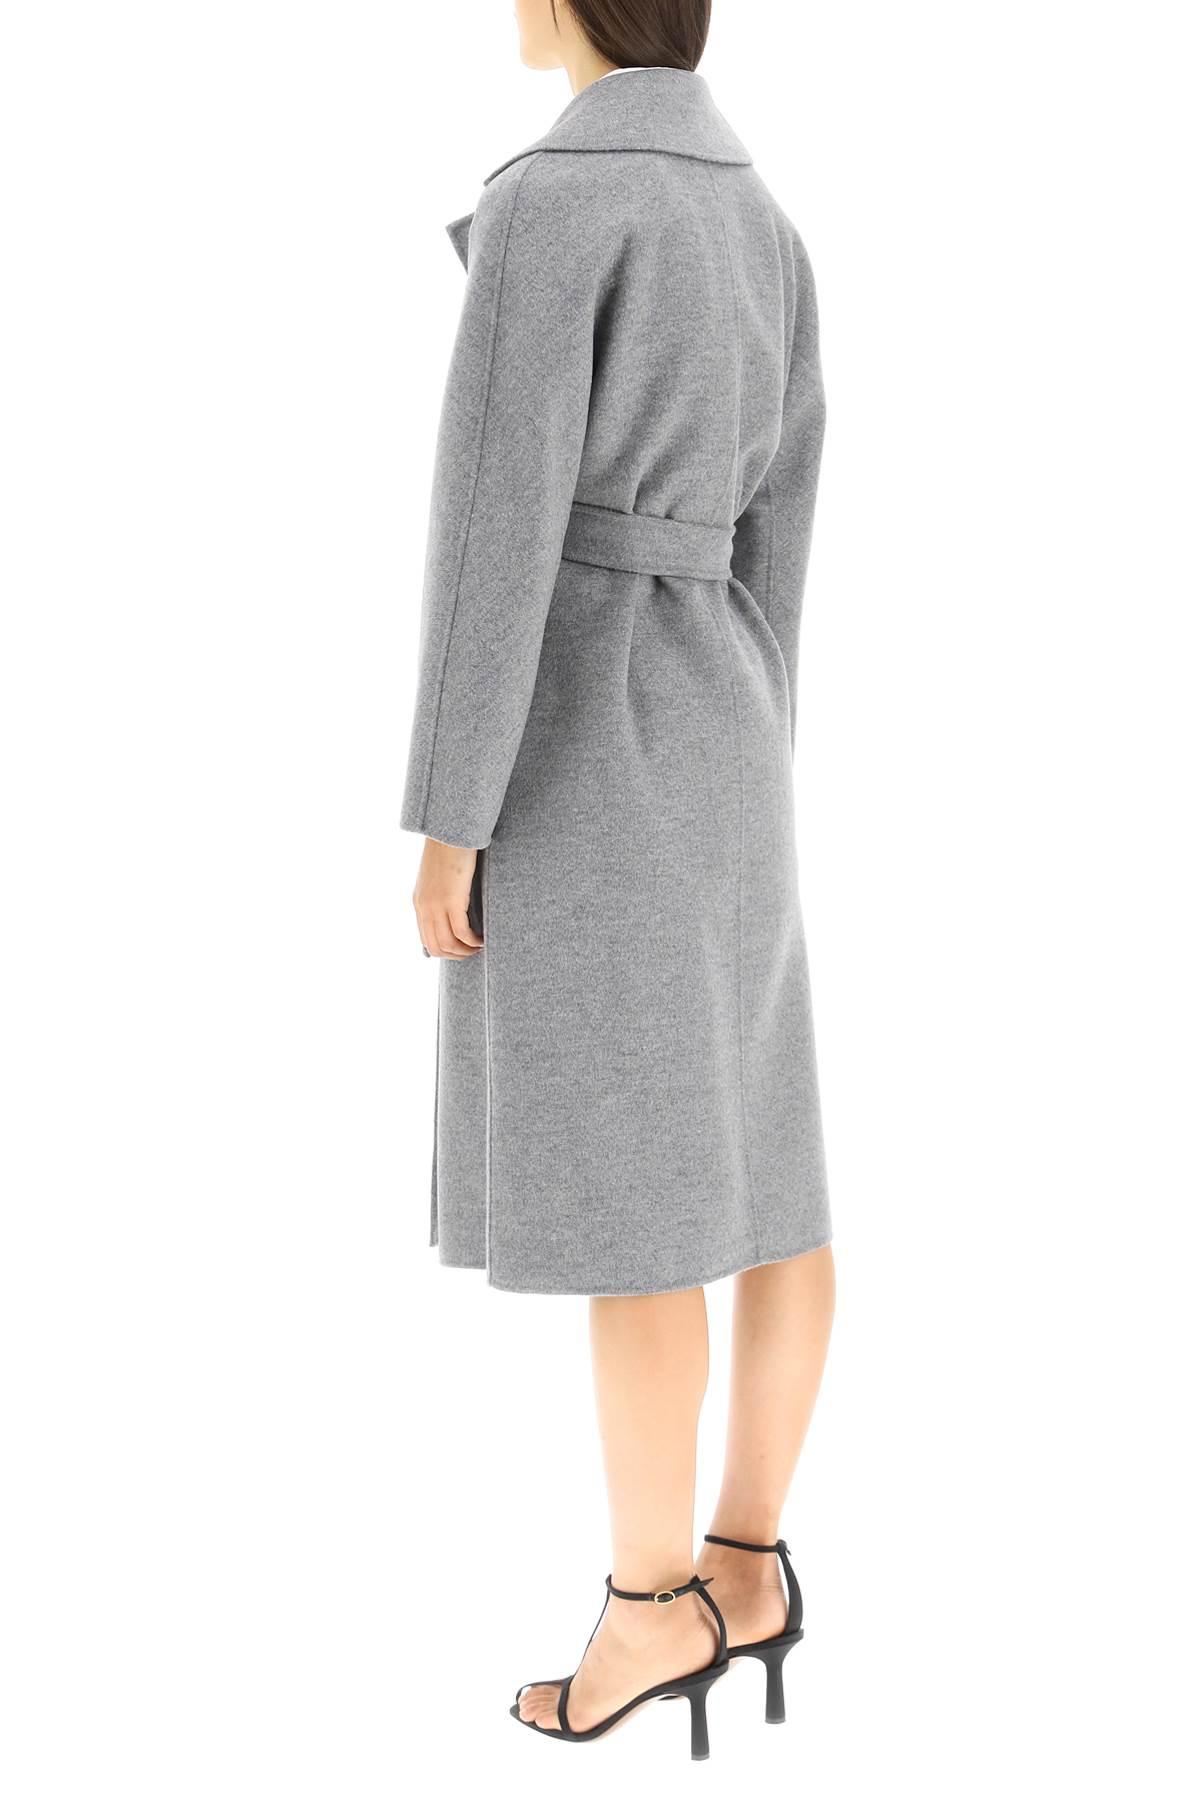 Max Mara Studio 'cles' Coat In Silk Wool And Cashmere in Gray | Lyst